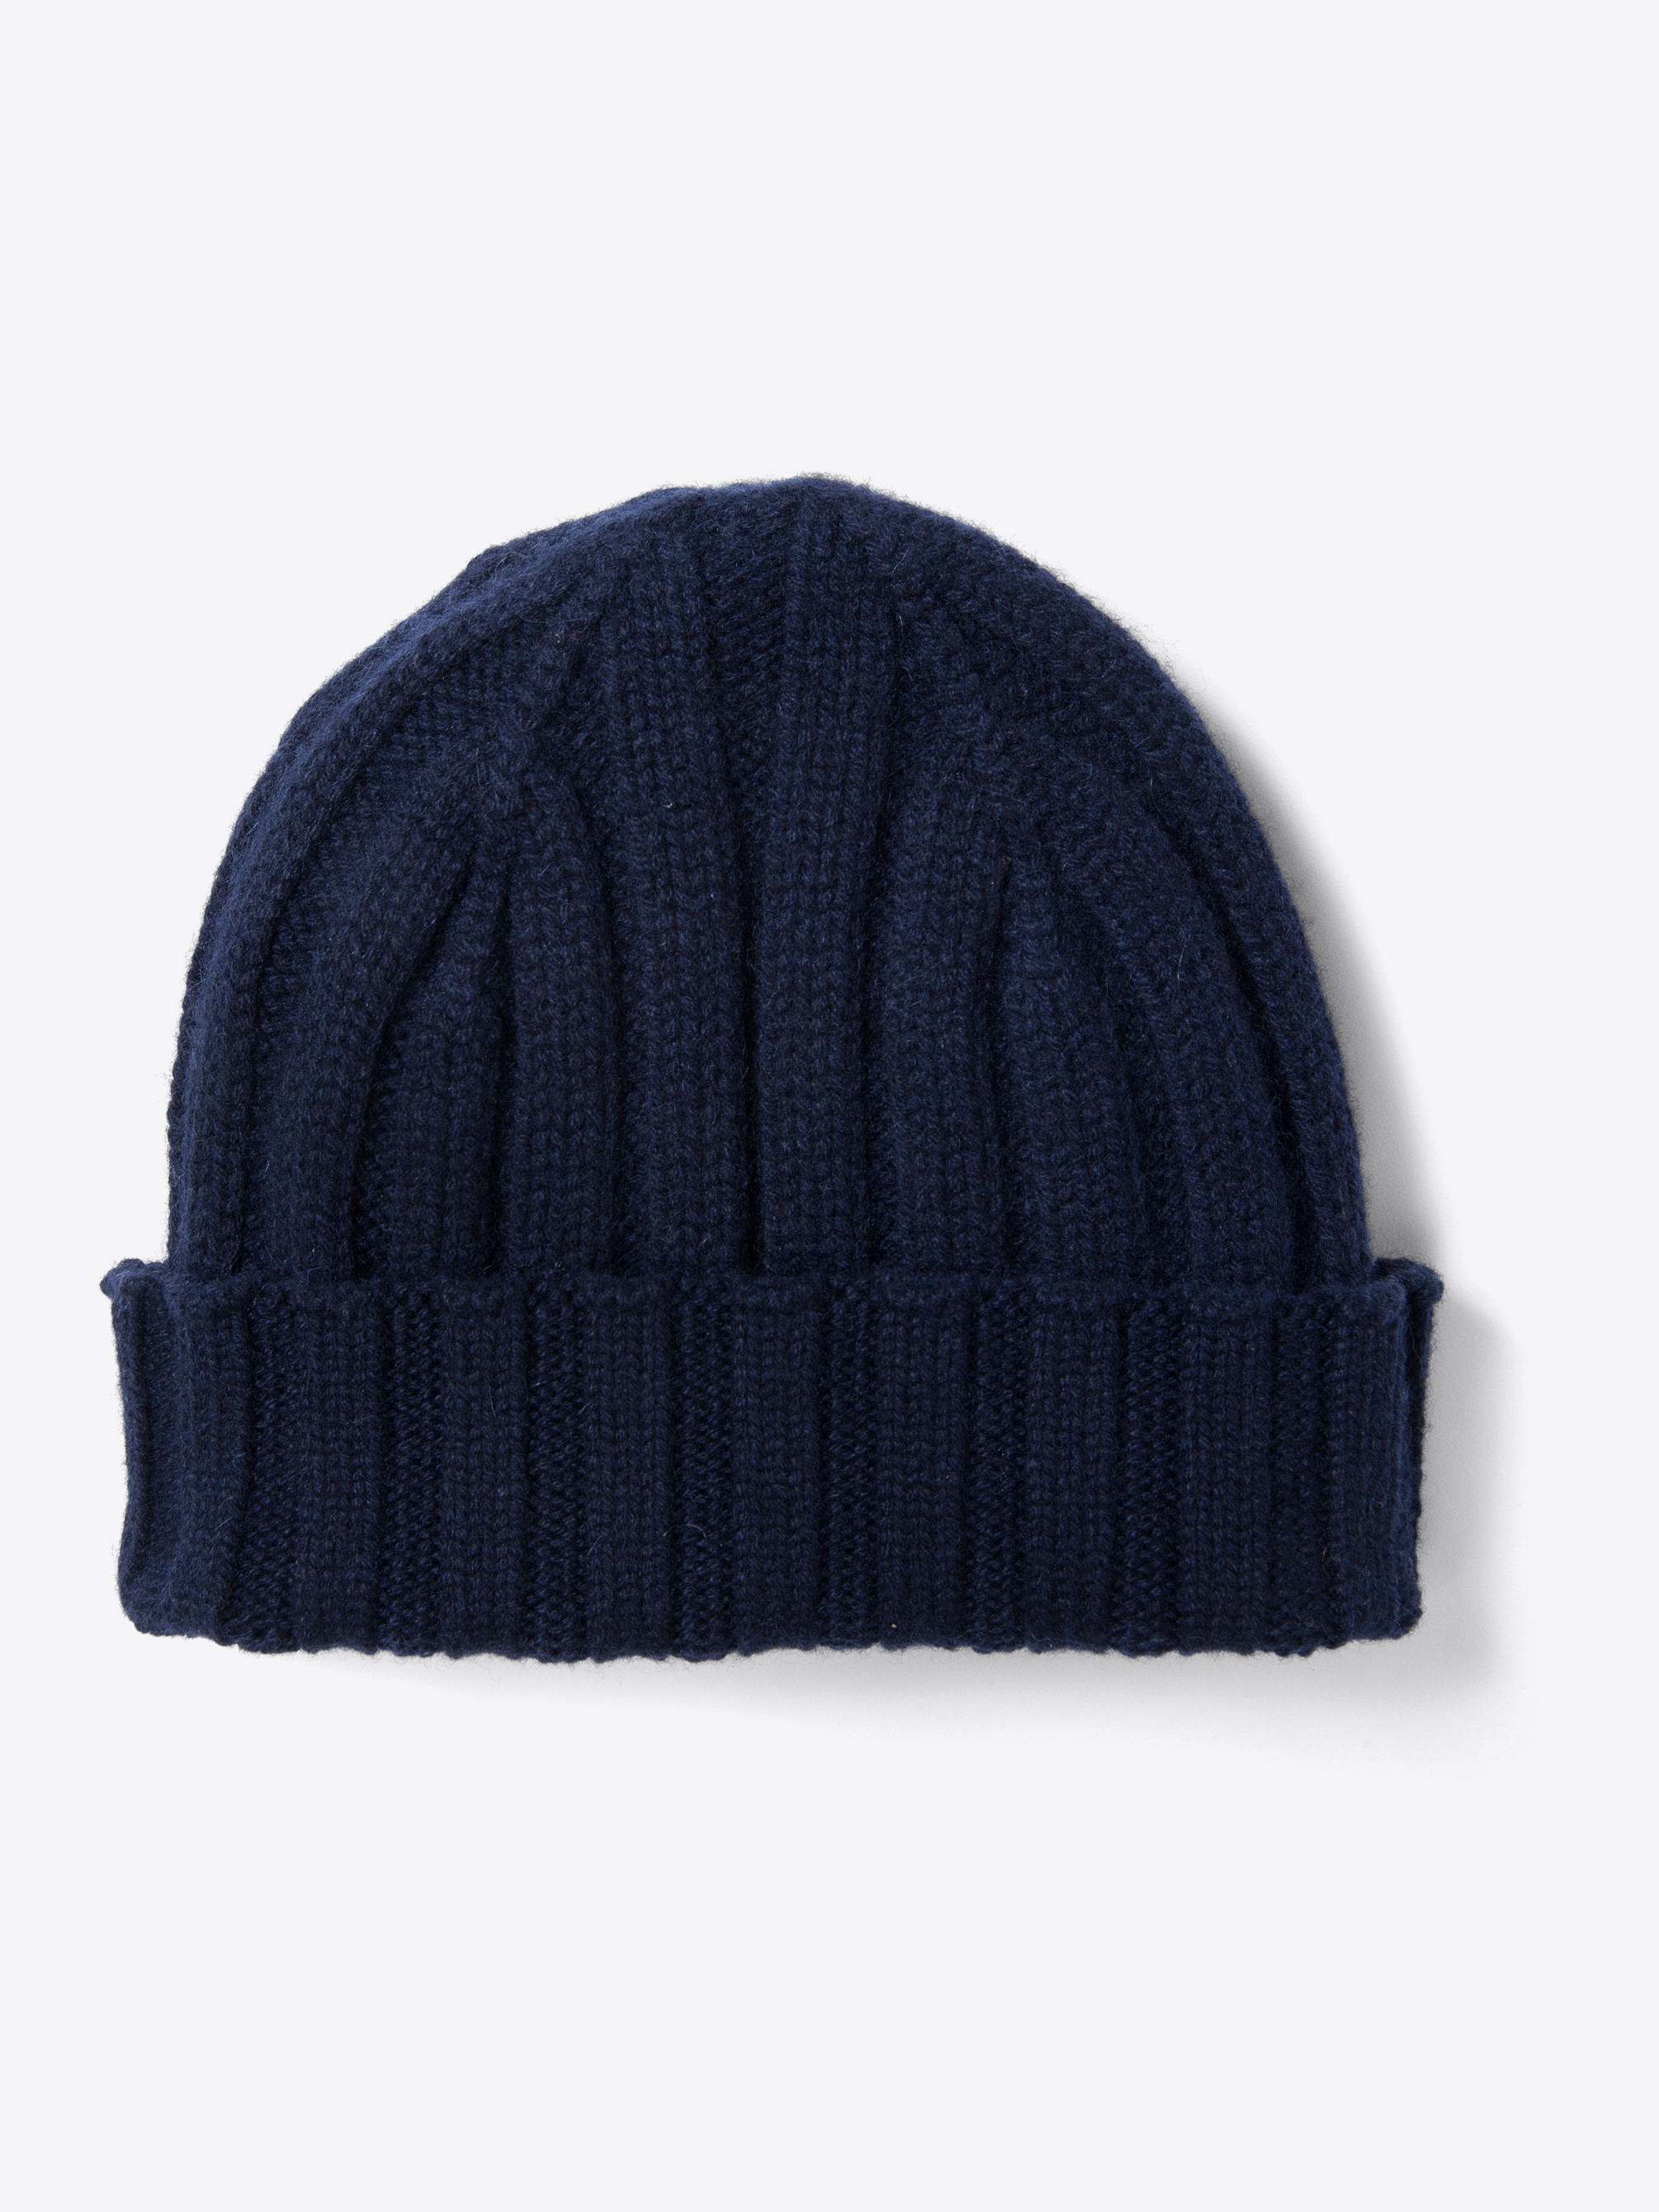 Zoom Image of Navy Cashmere Knit Hat